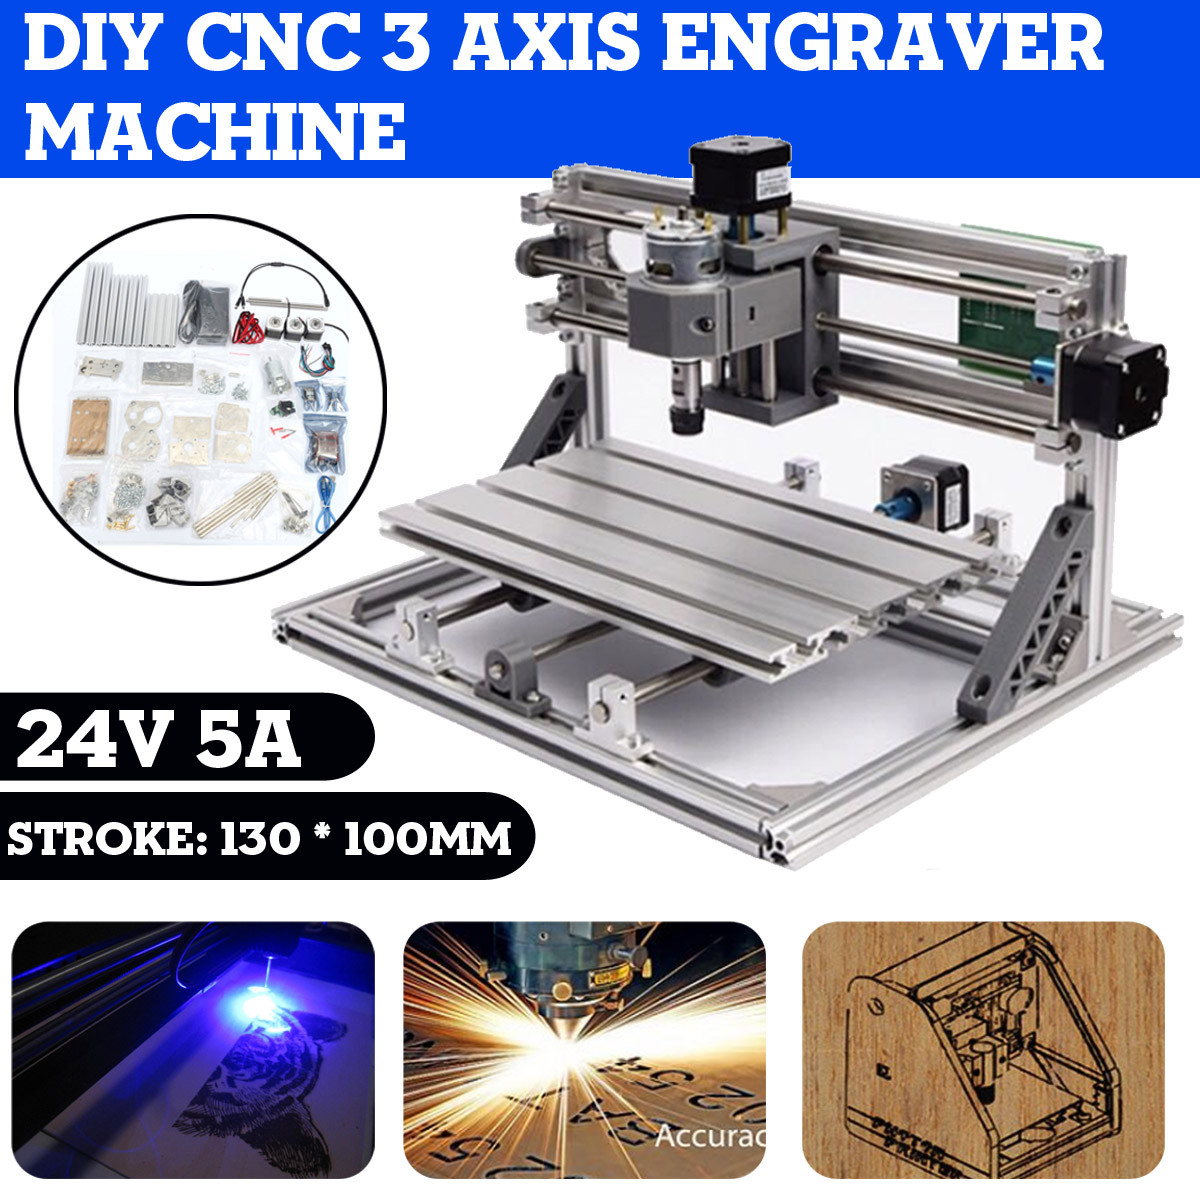 DIY Cnc 3 Axis Engraver Machine Pcb Milling Wood Carving Router Kit Arduino Grbl
 130 100 40mm DIY CNC 3 Axis Engraver Machine PCB